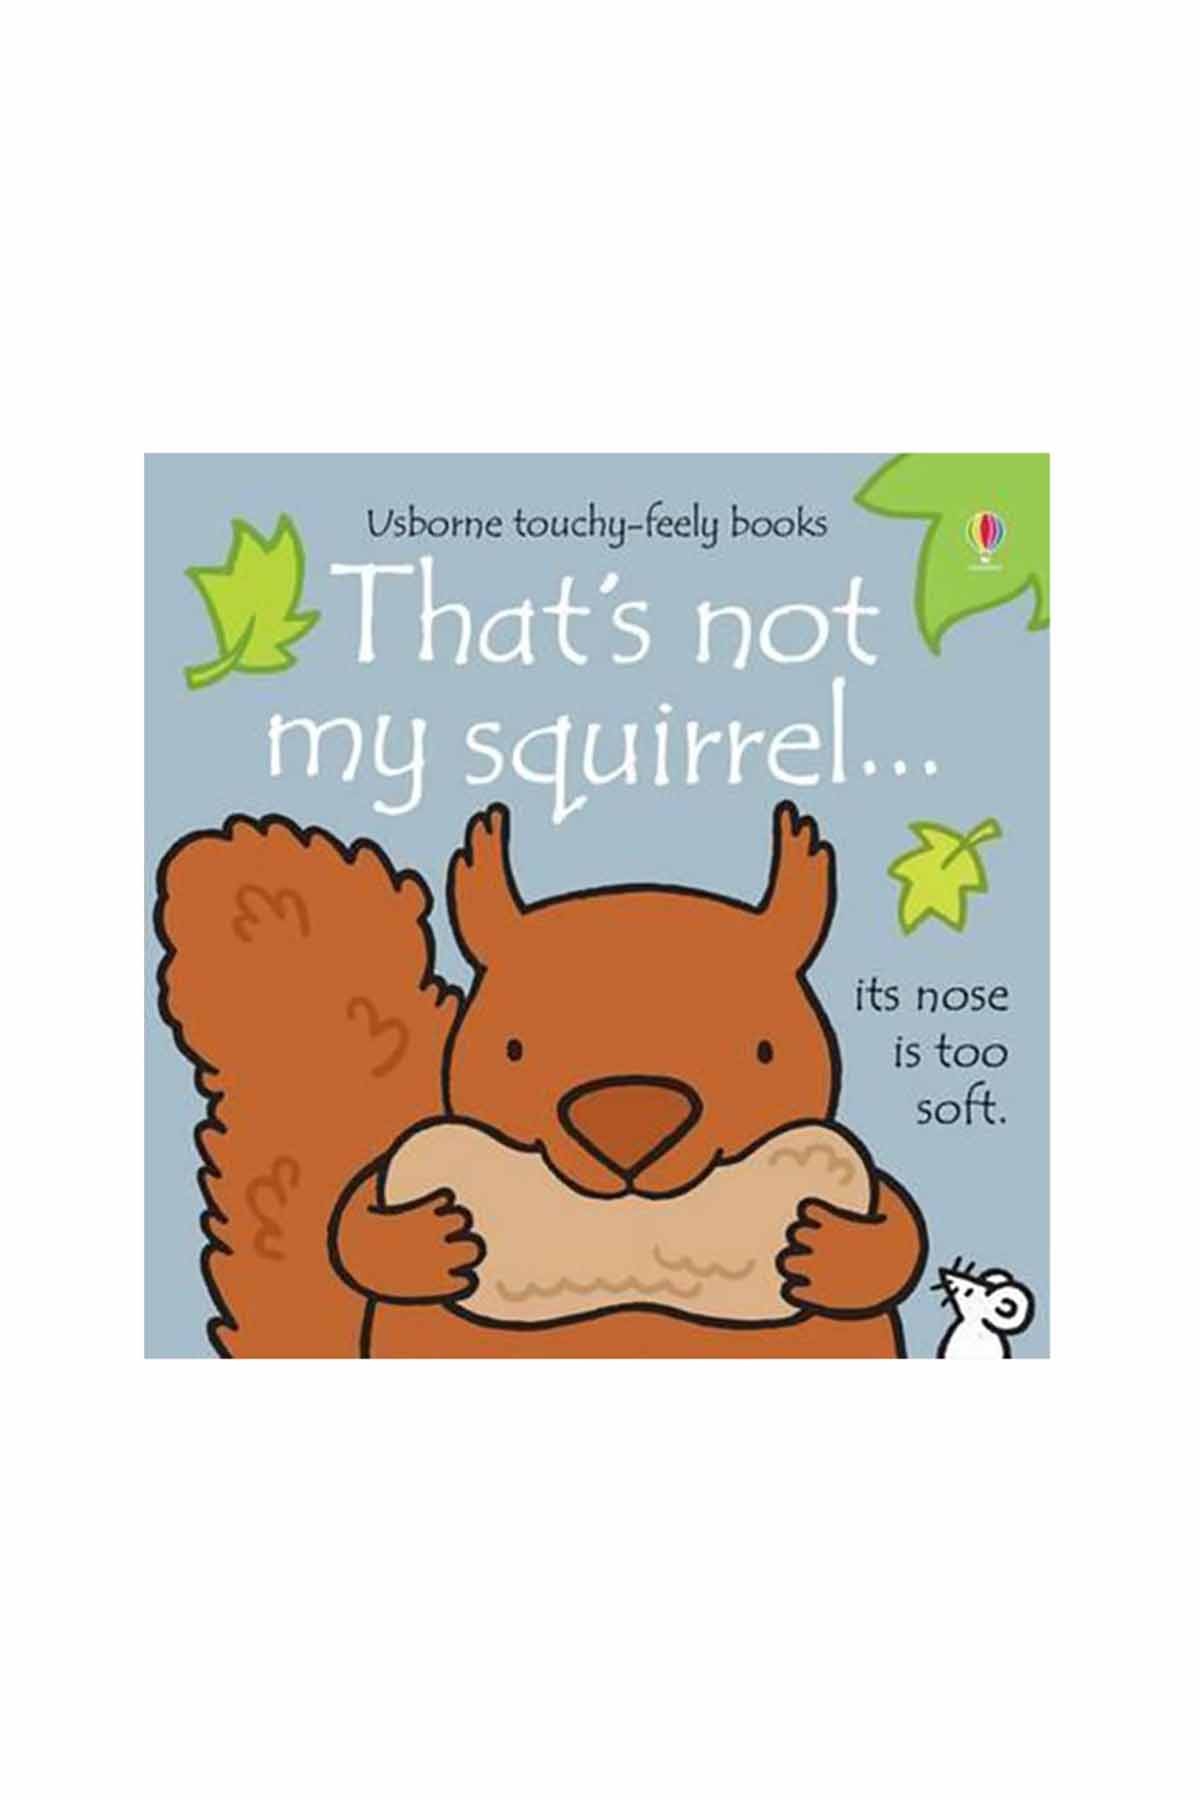 The Usborne That's Not My Squirrel